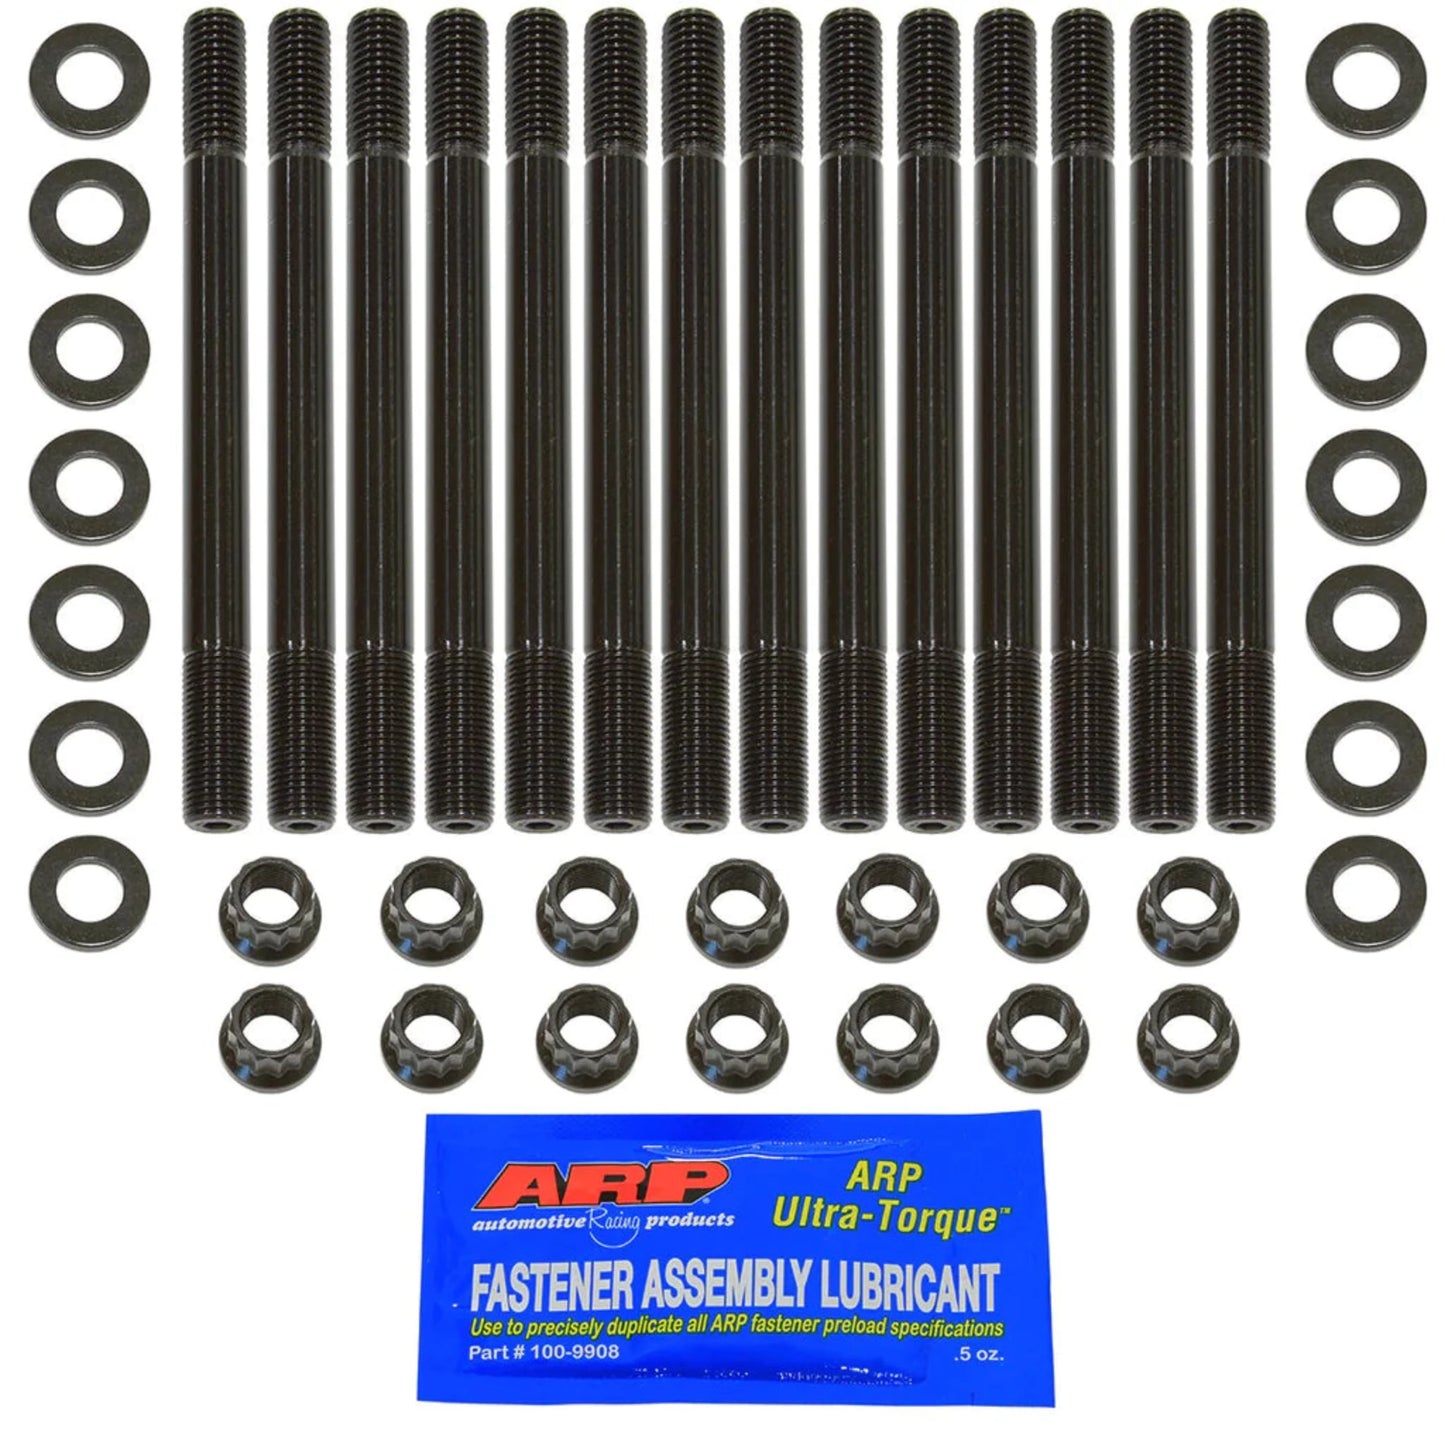 Main 1/2" Stud Kit to suit Nissan RB20, RB25, RB26, RB30